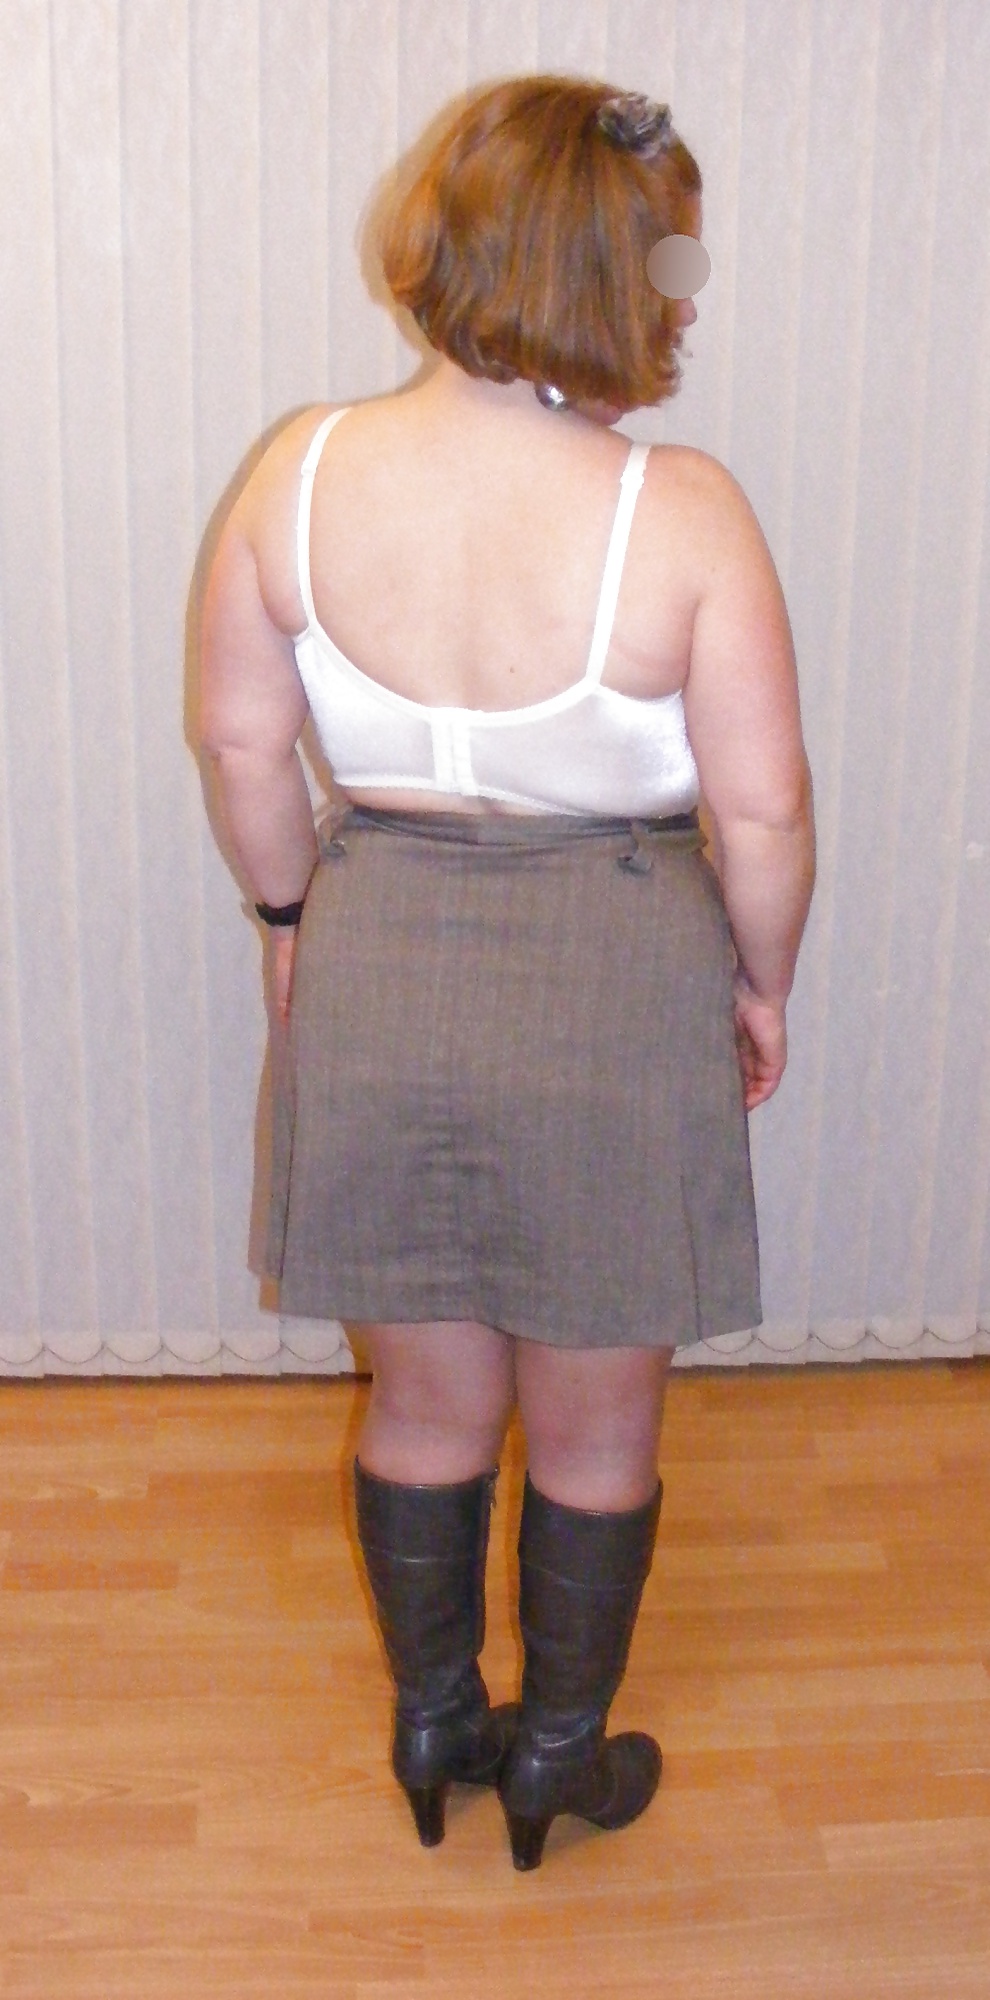 Slutty secretary in girdle, stockings, and boots #17413389